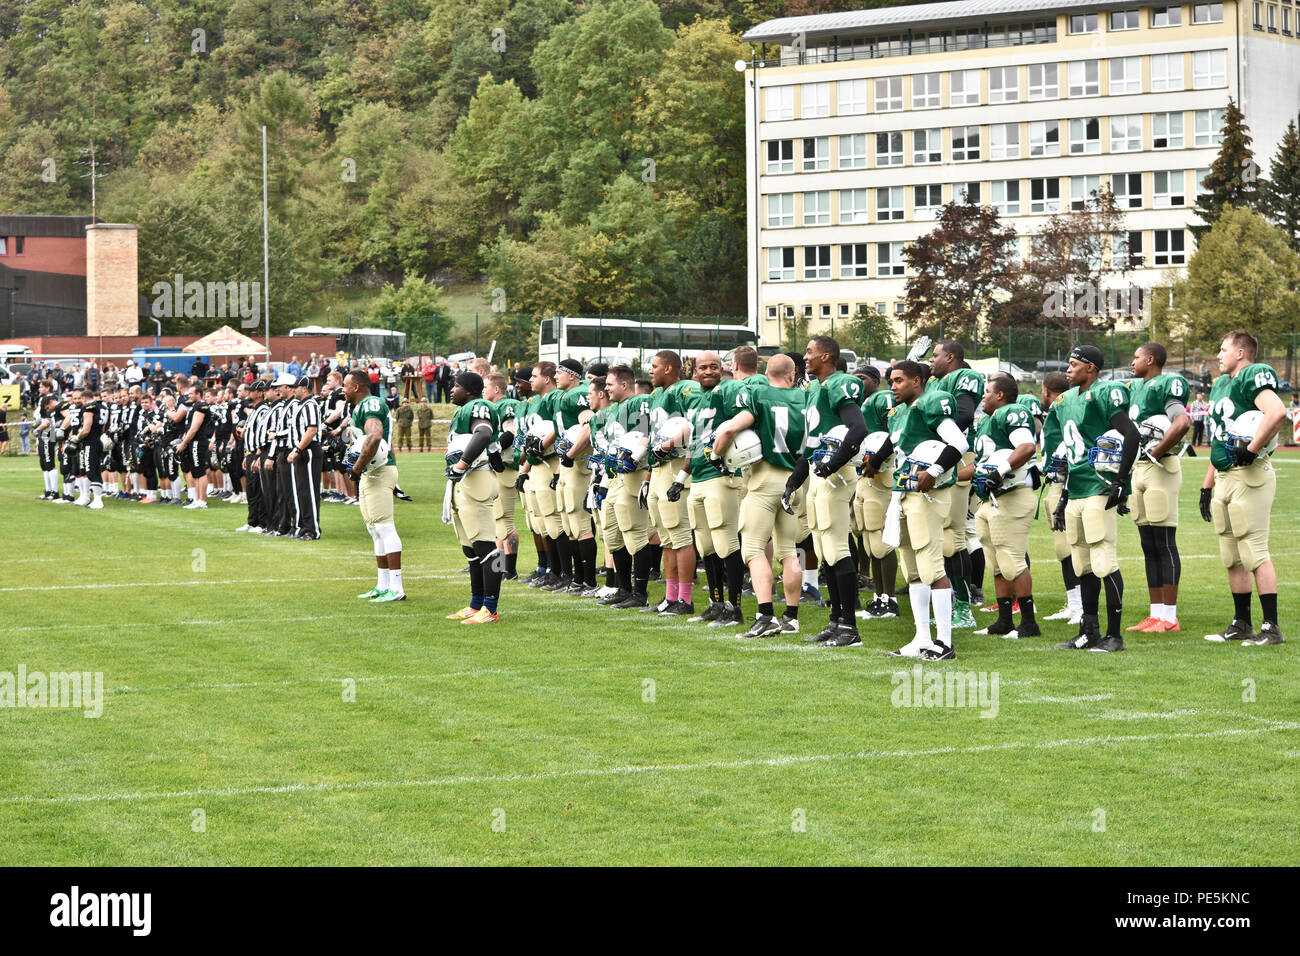 Troopers from the 2nd Cavalry Regiment's football team stand side-by-side with the Prague Black Panthers as they prepare for each country's national anthem and the coin toss before starting their game in Cesky Krumlov, Czech Republic, Sept. 26, 2015. The team participated in an American football game with the local Czech Republic semi-professional football team as the unit helped to commemorate the 70th anniversary of Cesky Krumlov's liberation during World War II while also demonstrating the U.S. commitment to their NATO and Czech allies. (U.S. Army photo by Sgt. William A. Tanner/released) Stock Photo